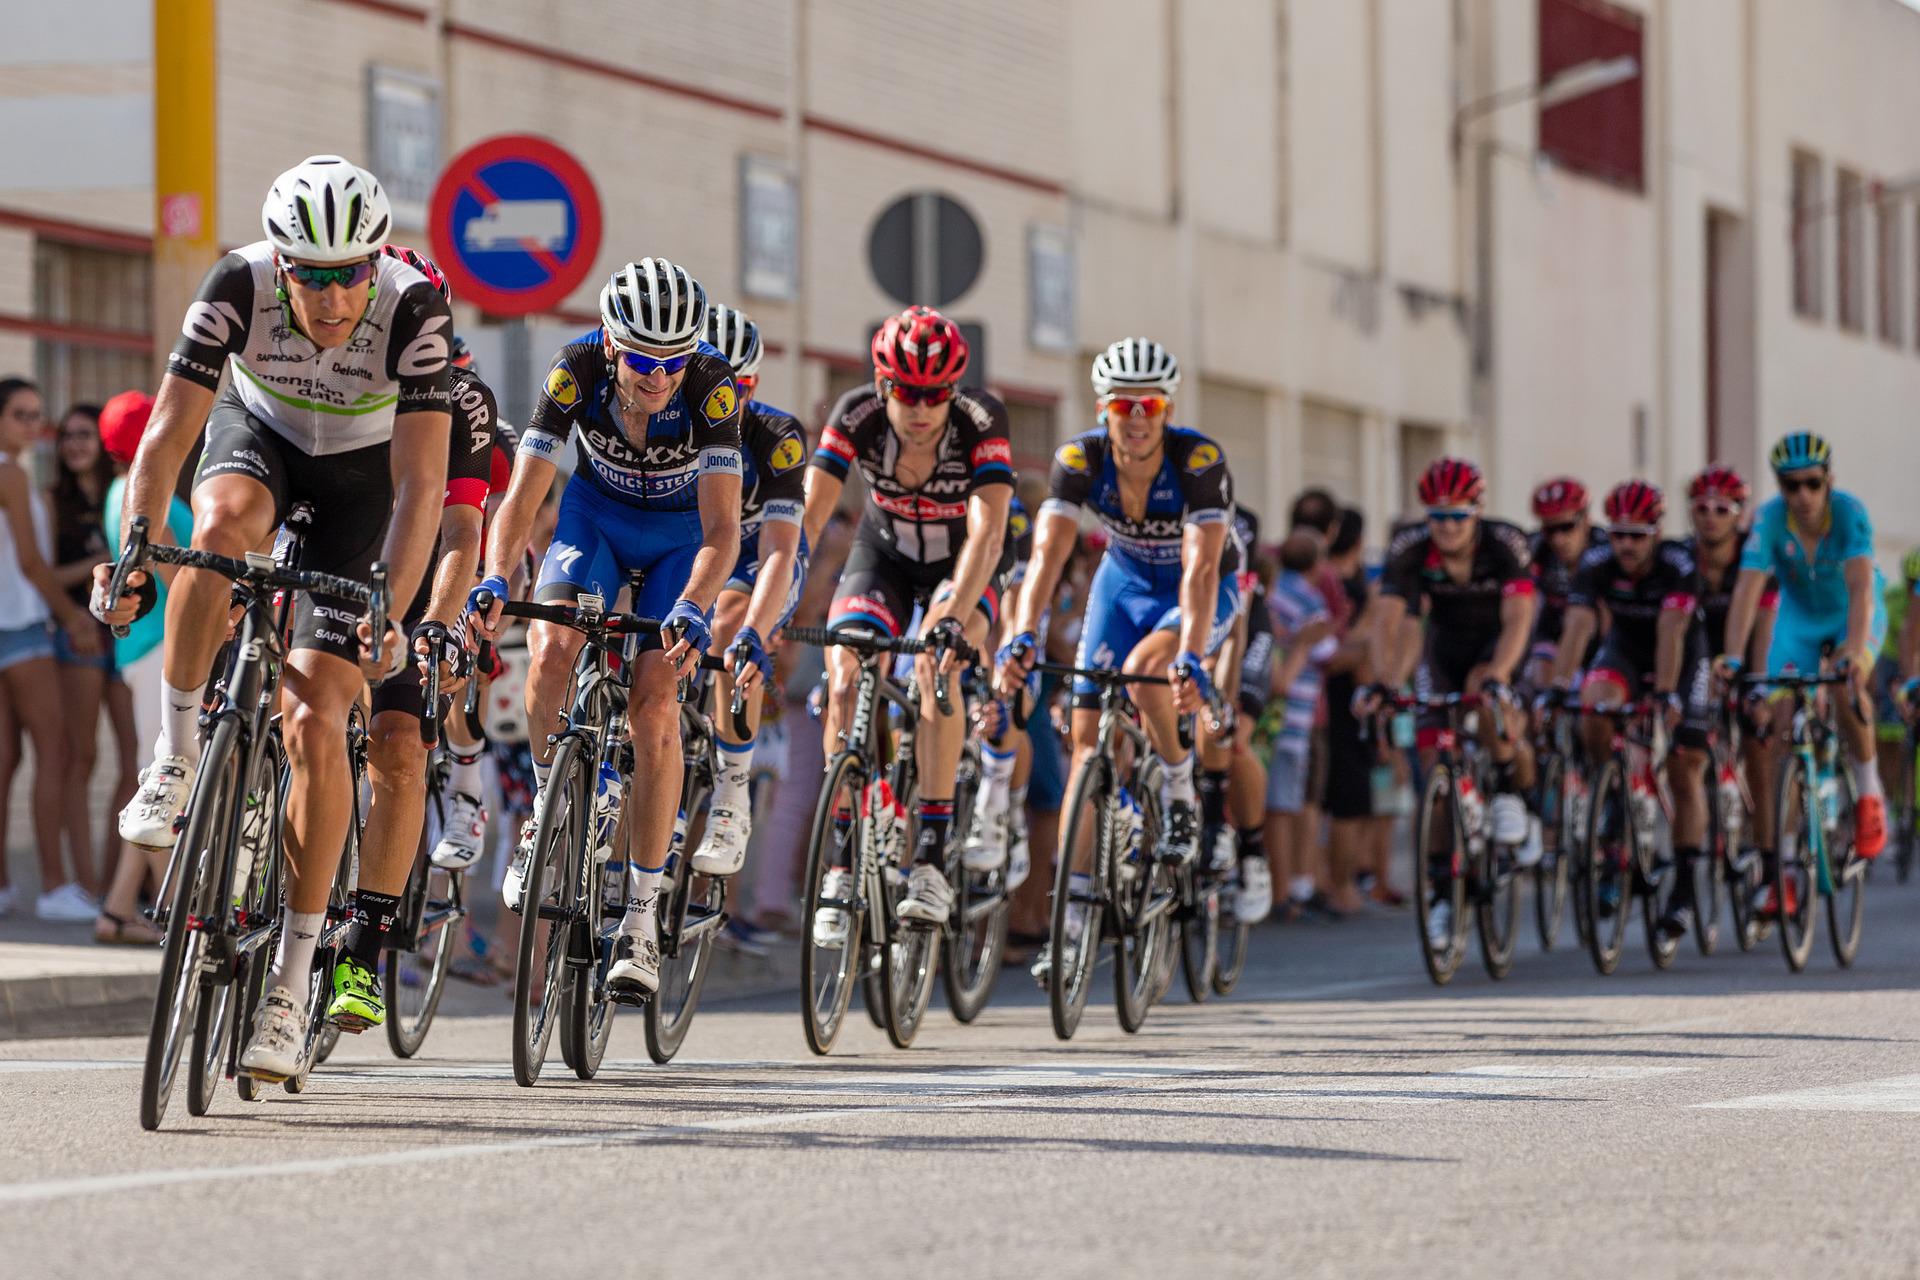 The Cycling Tour arrives to Marbella